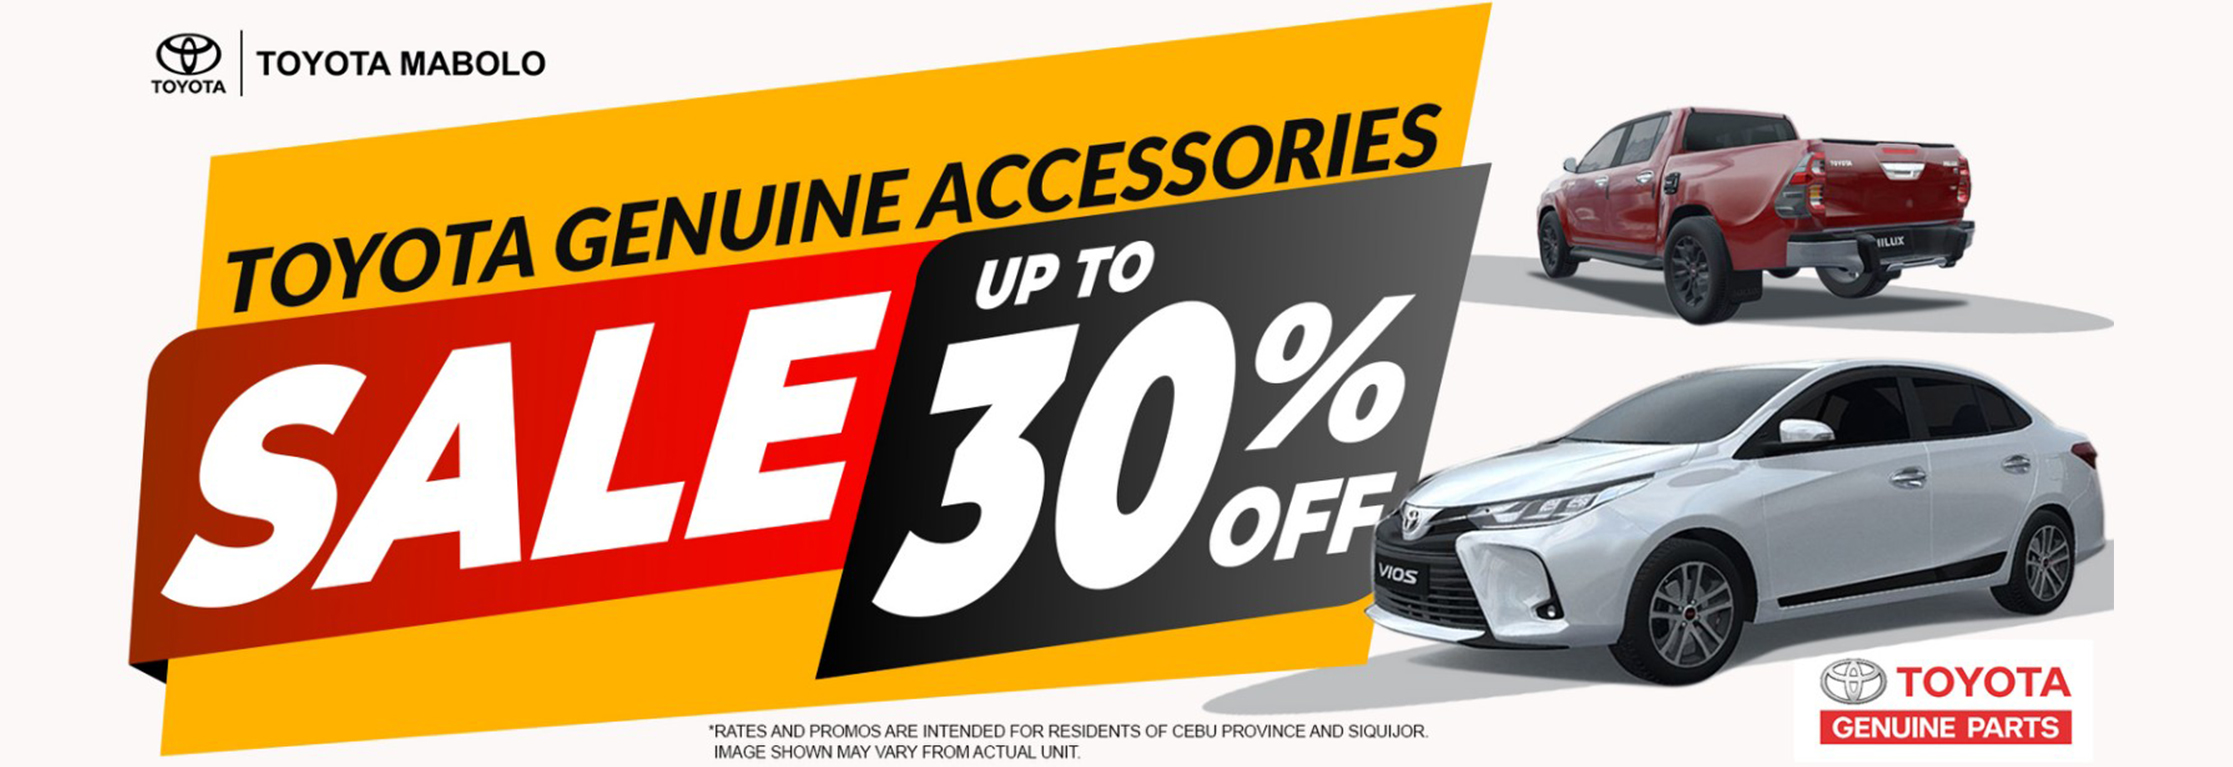 Parts and Accessories Promo